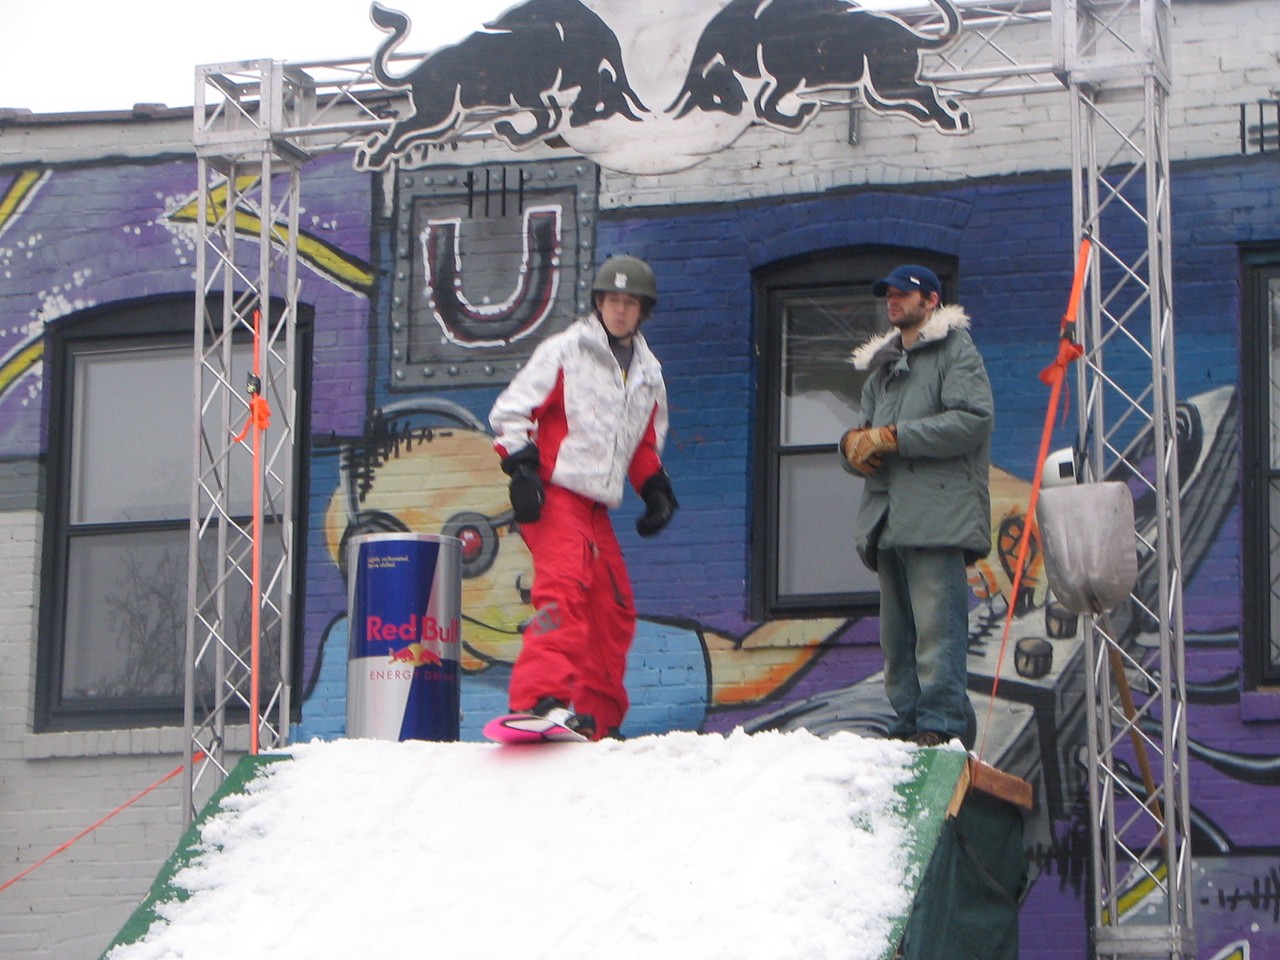 The Loop Ice Carnival